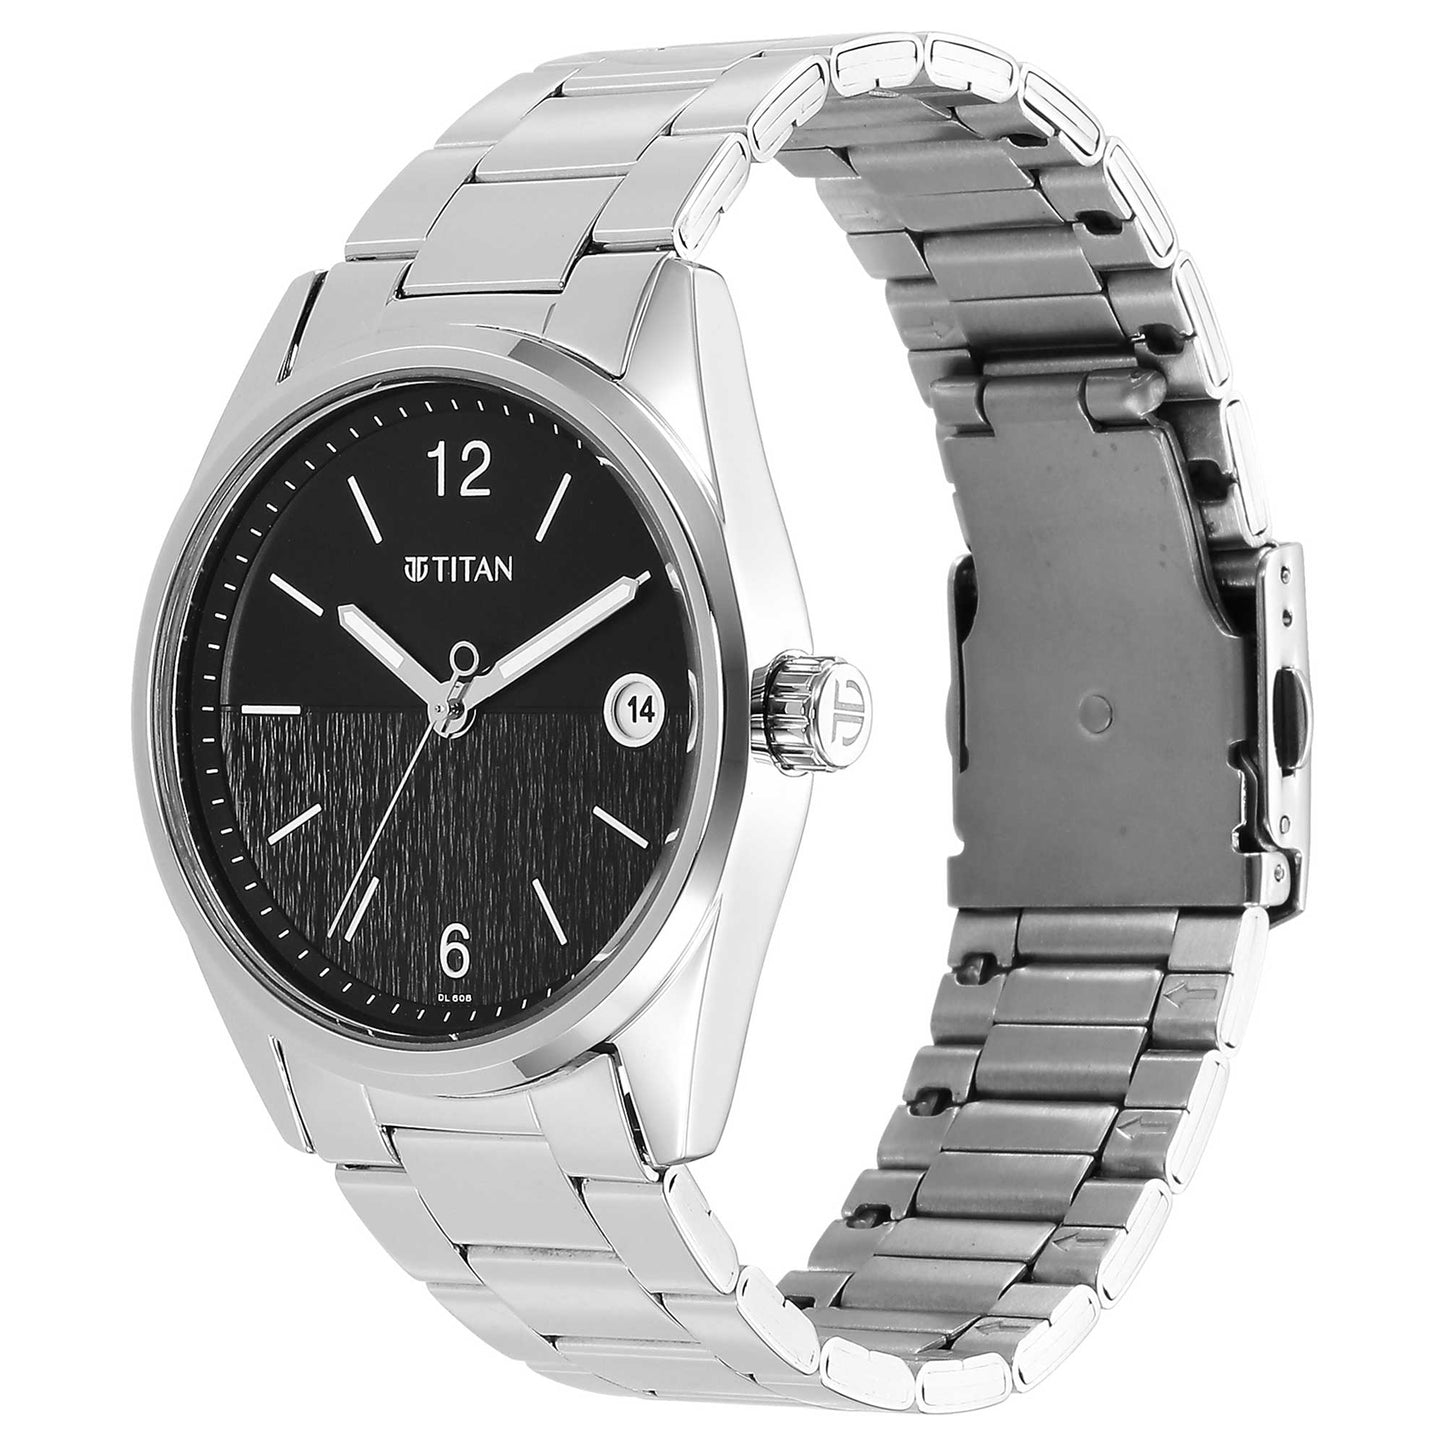 Titan Neo Black Dial Analog with Date Stainless Steel Strap watch for Men